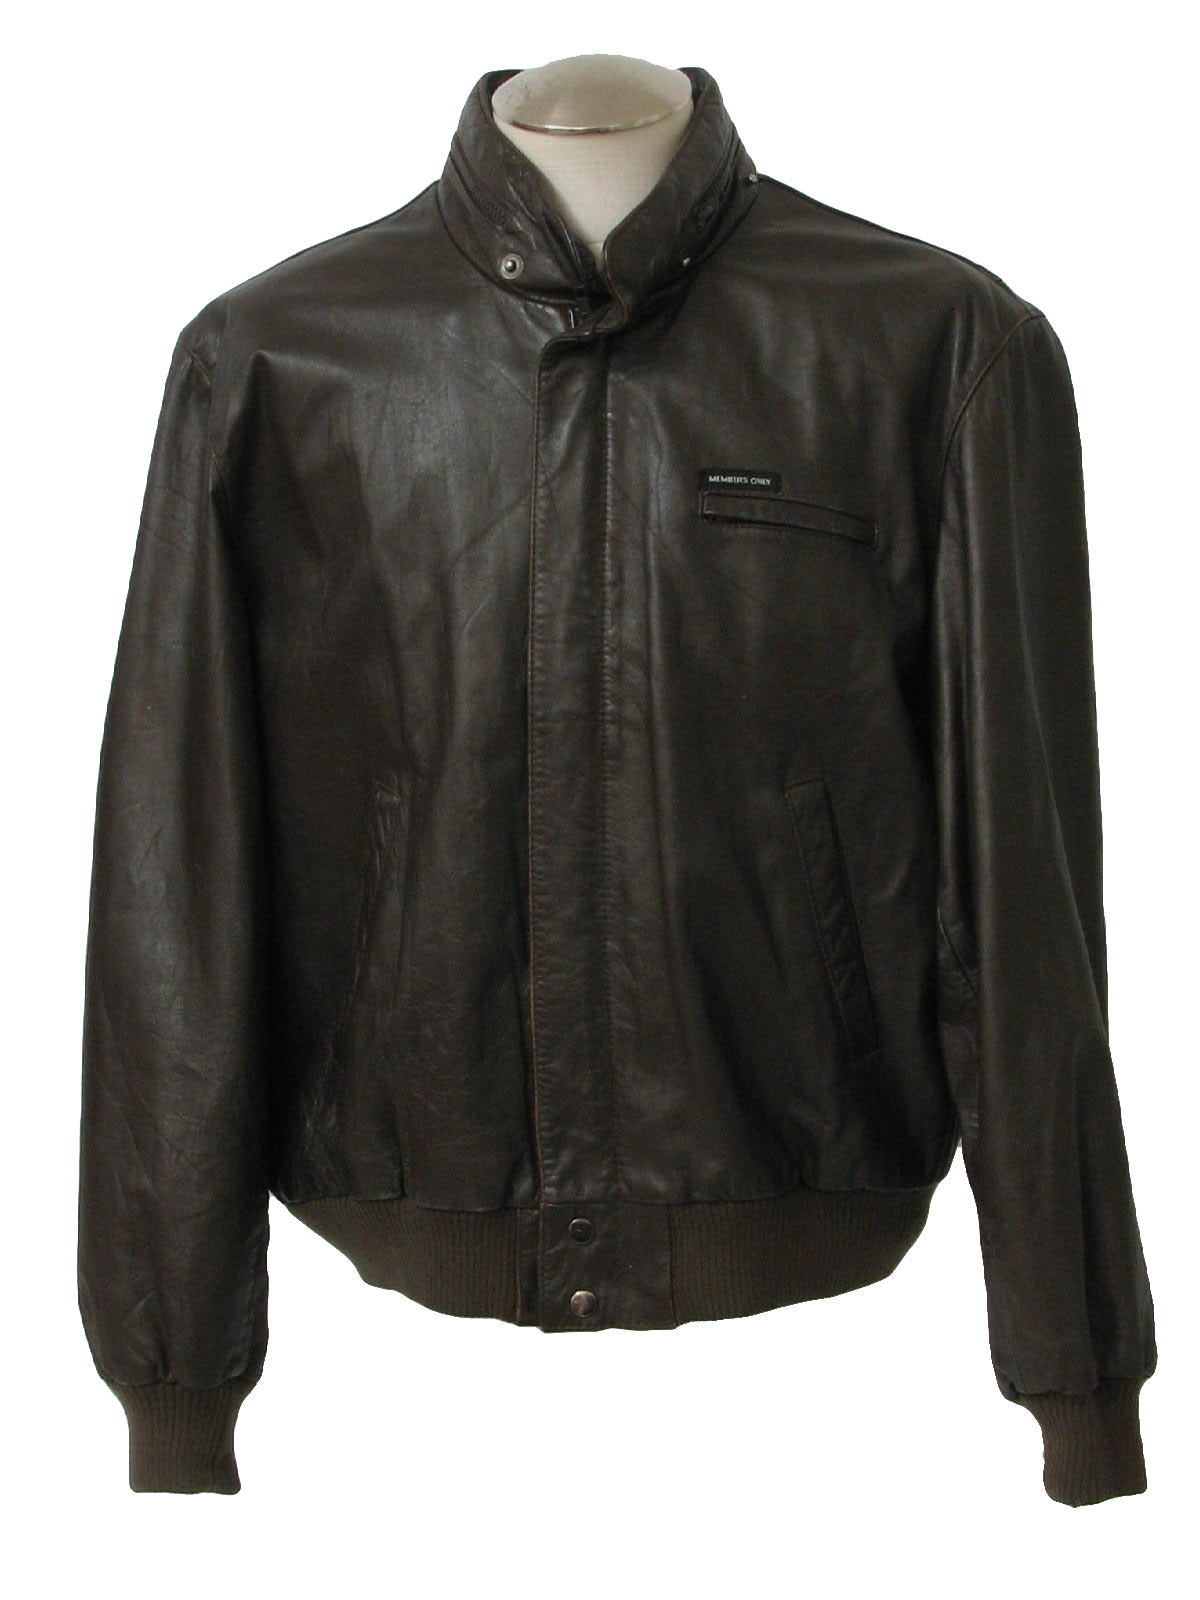 Retro 1990's Leather Jacket (Members Only) : 90s -Members Only- Mens ...